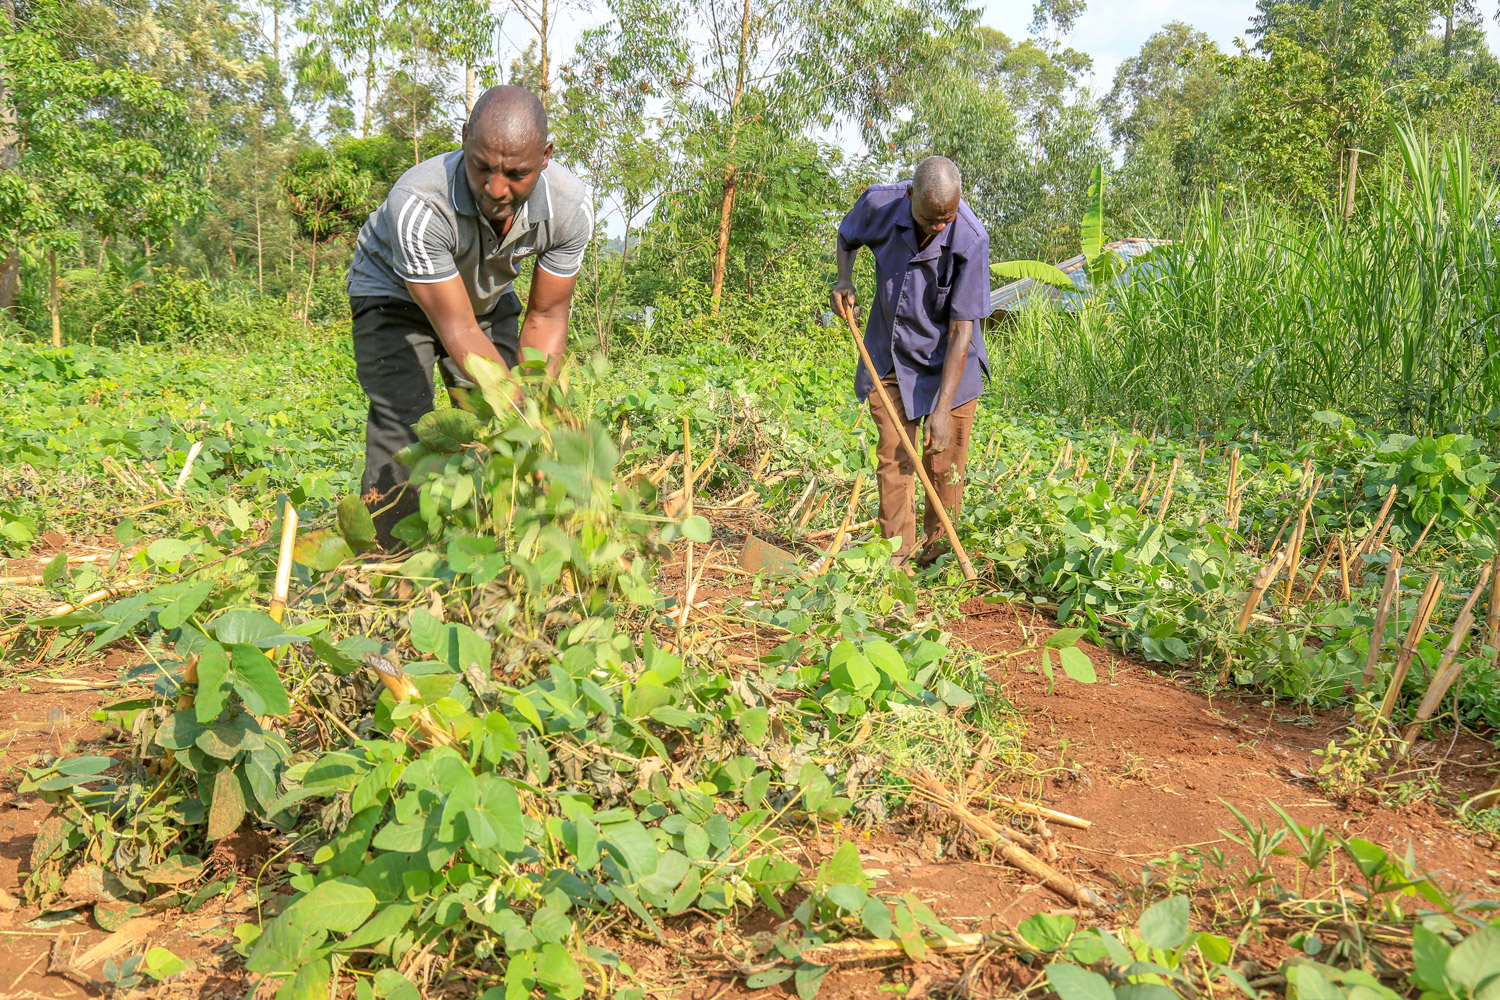 How can smallholder farmers benefit from soil carbon initiatives? Lessons from REDD+